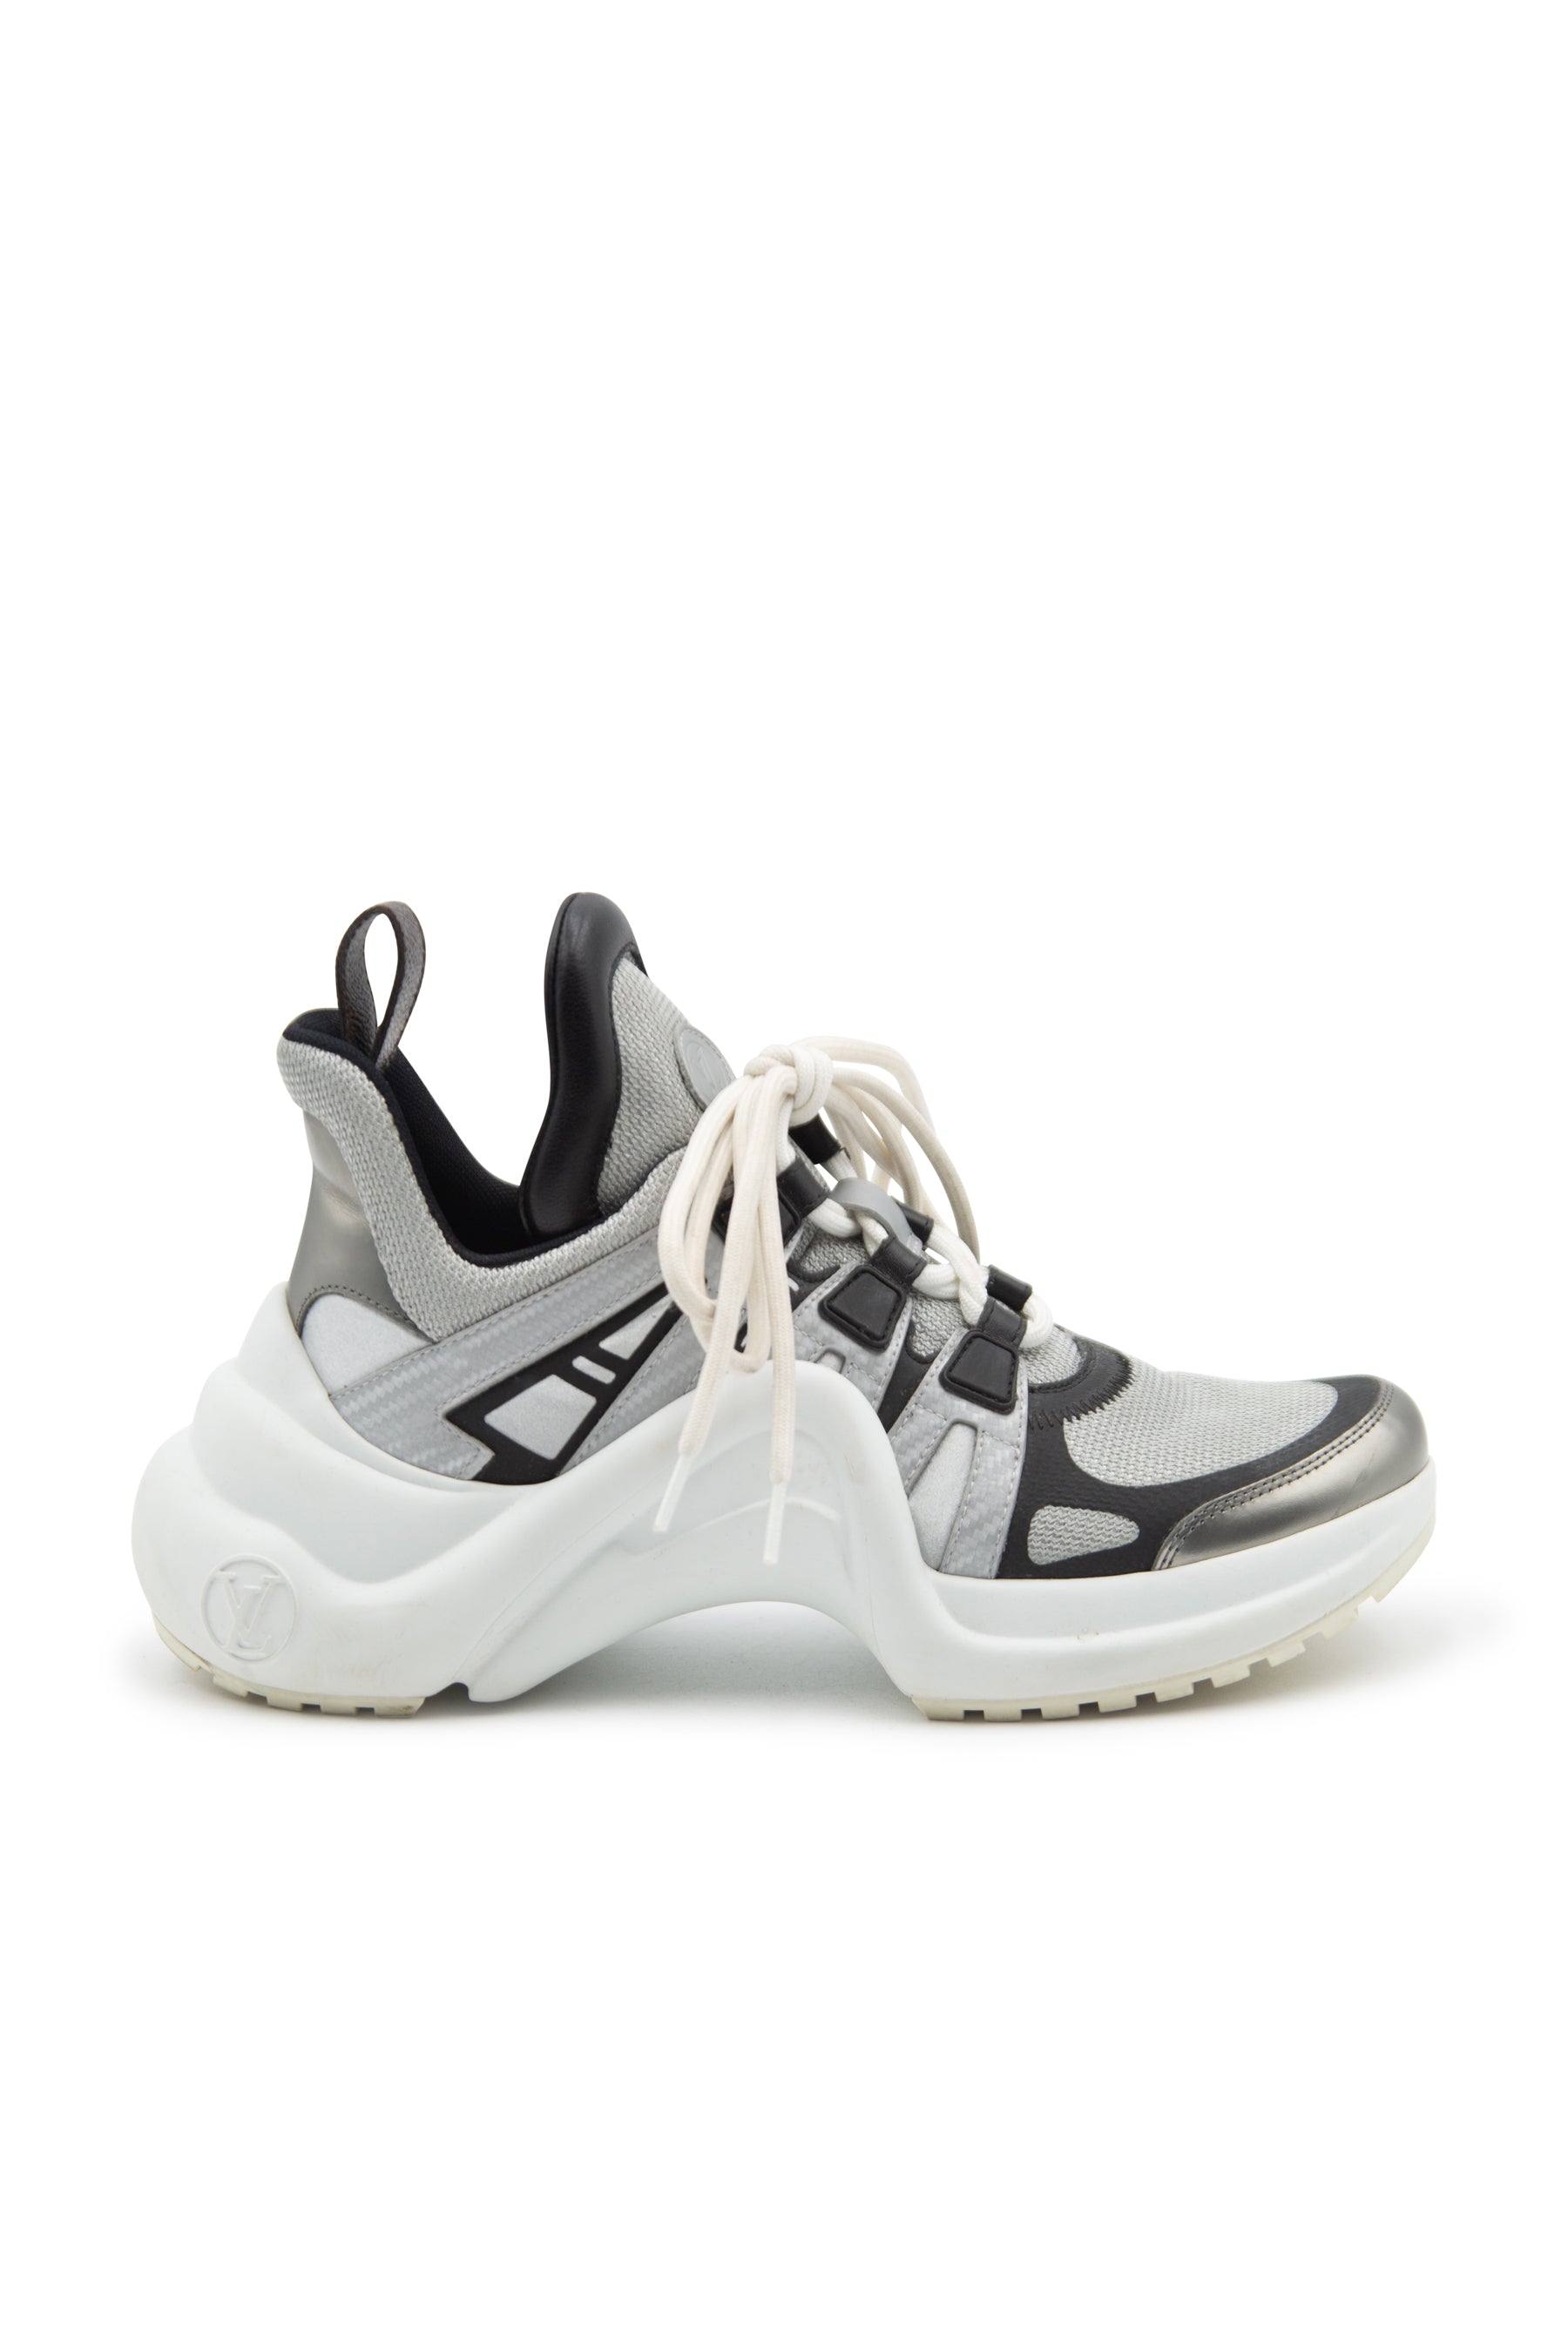 Louis Vuitton Archlight Chunky Sneakers It 37 | 7